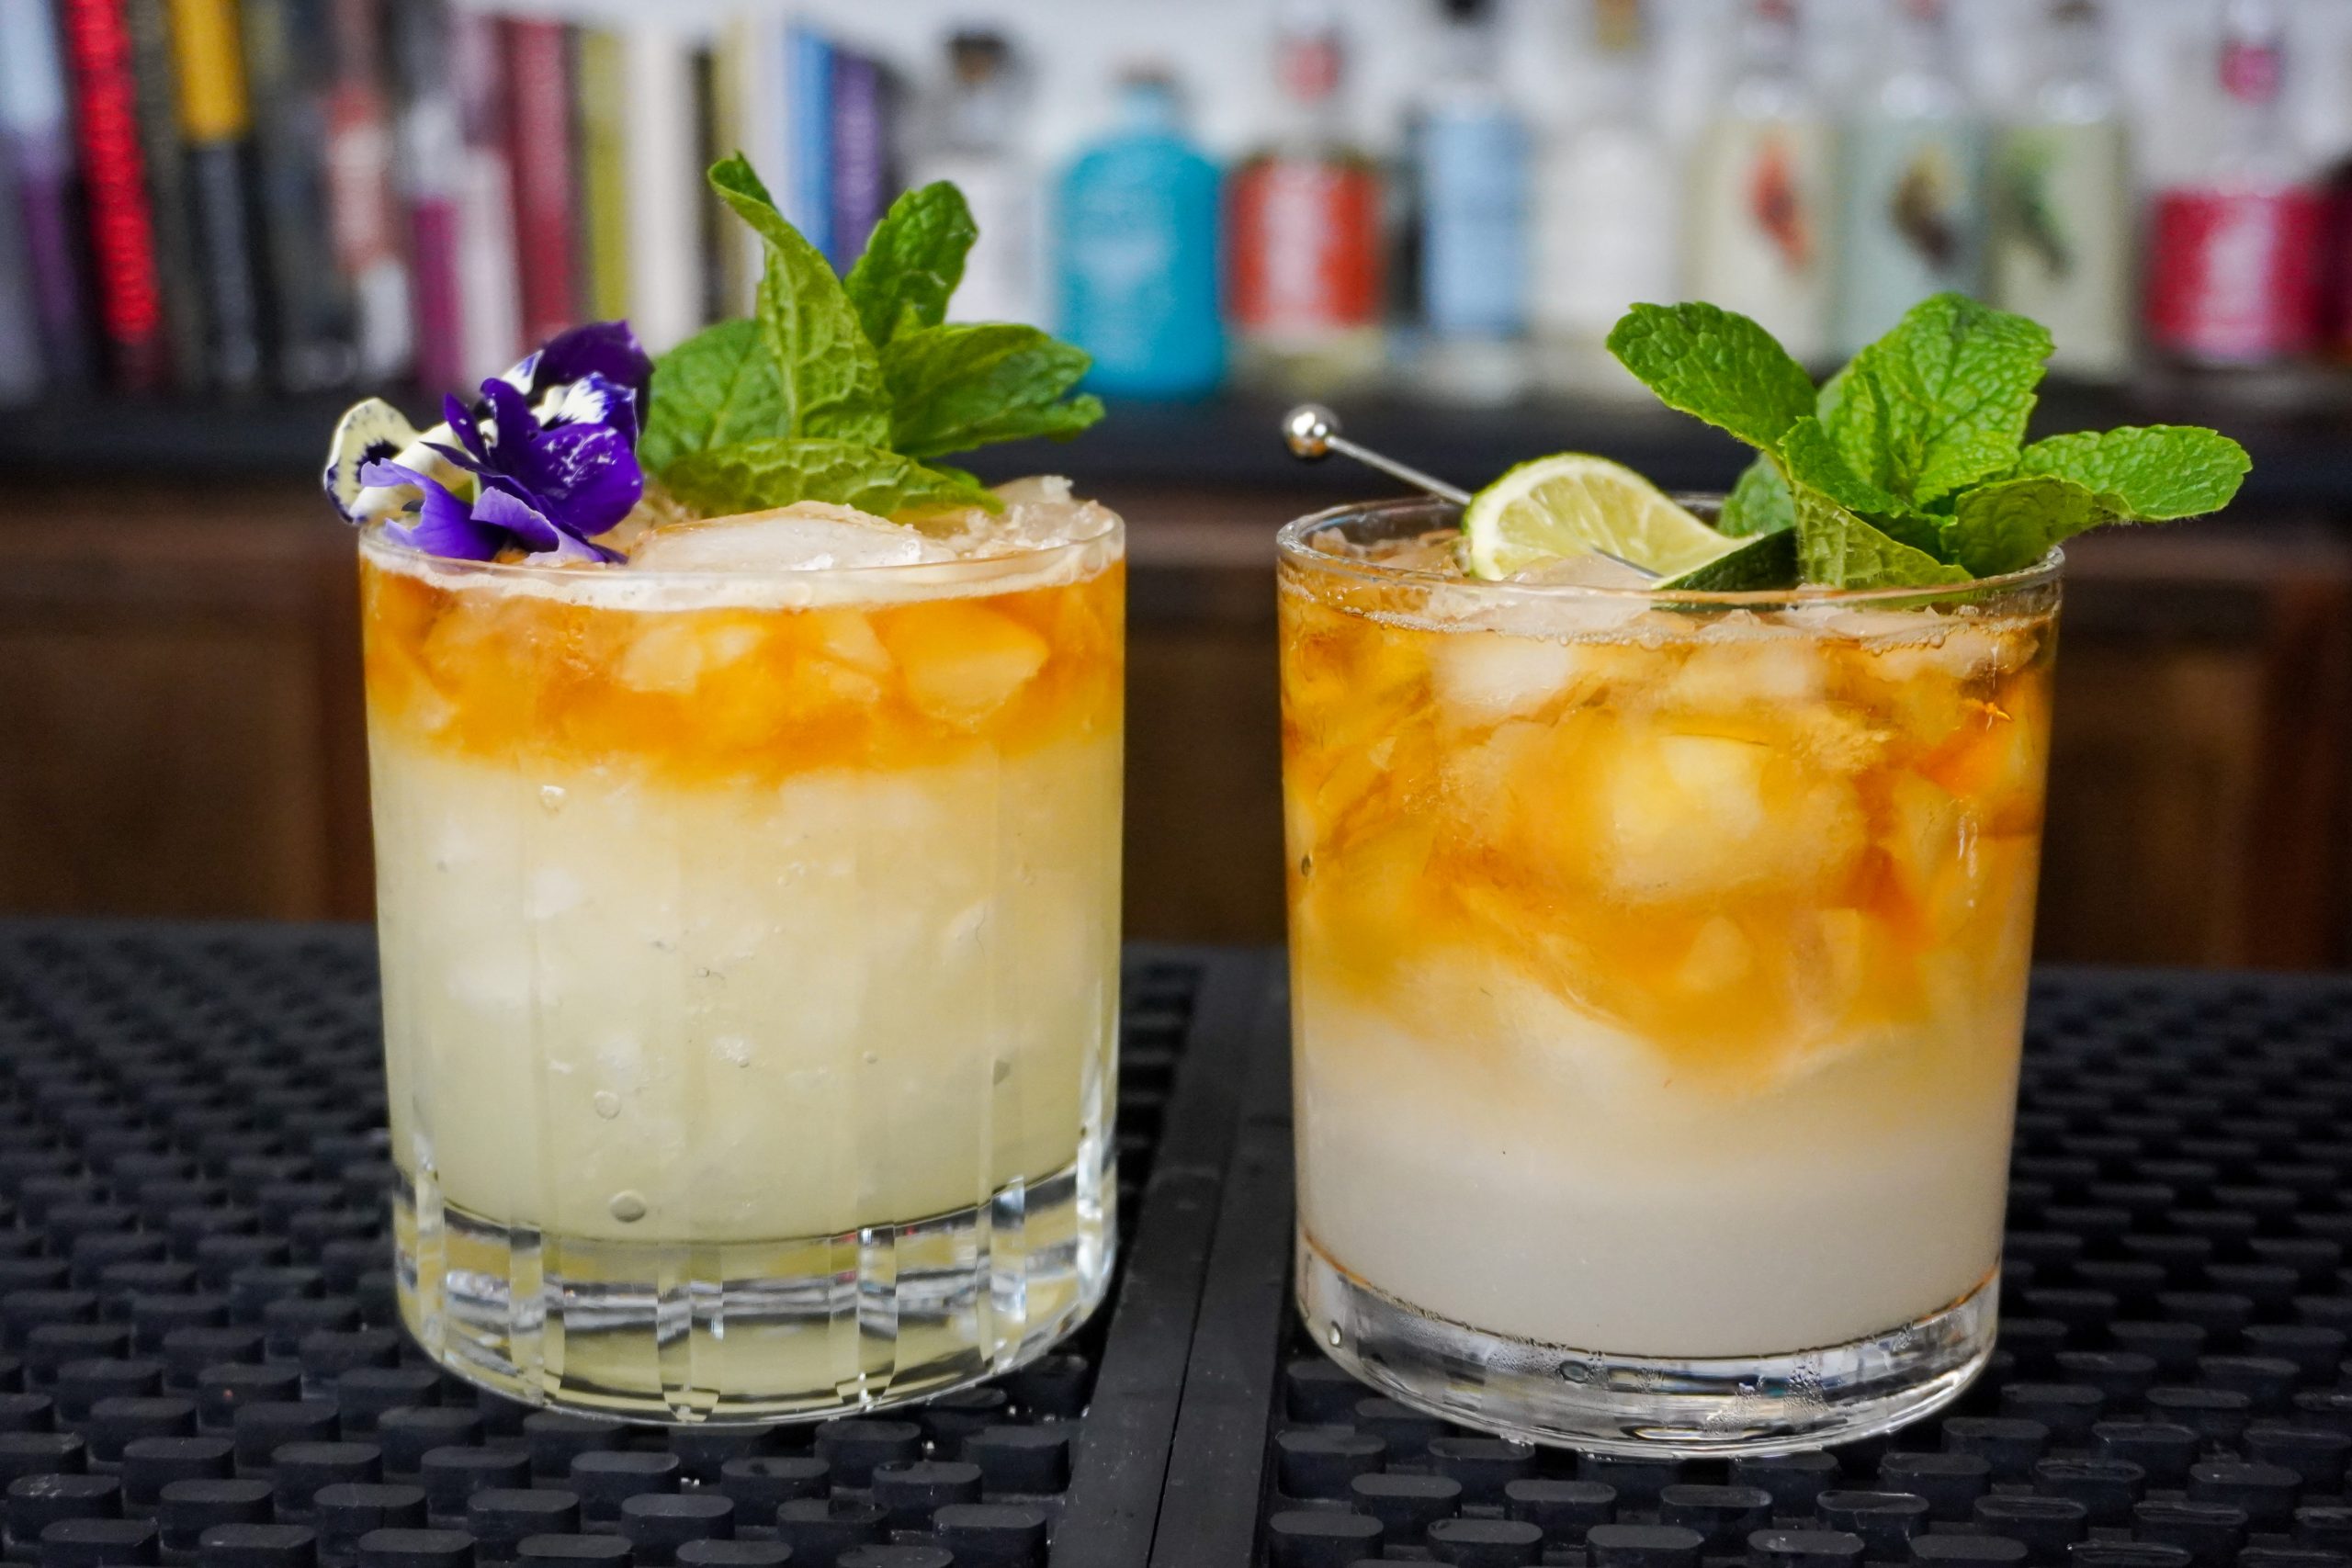 2. Mai Tai cocktails with 2 ounce dark rum, 1 ounce lime juice, and orange Curacao in a double old-fashioned glass each